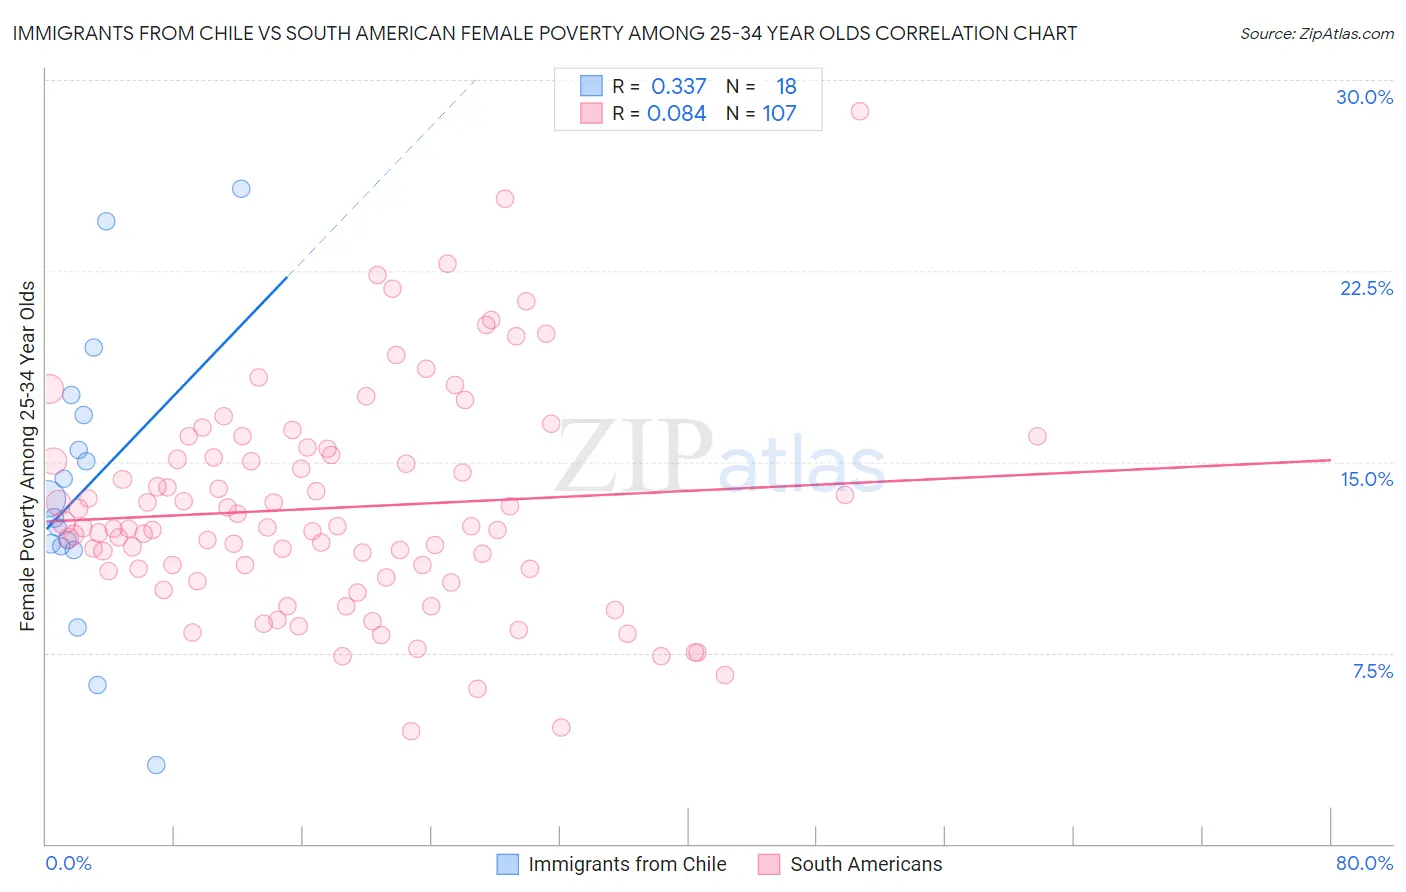 Immigrants from Chile vs South American Female Poverty Among 25-34 Year Olds